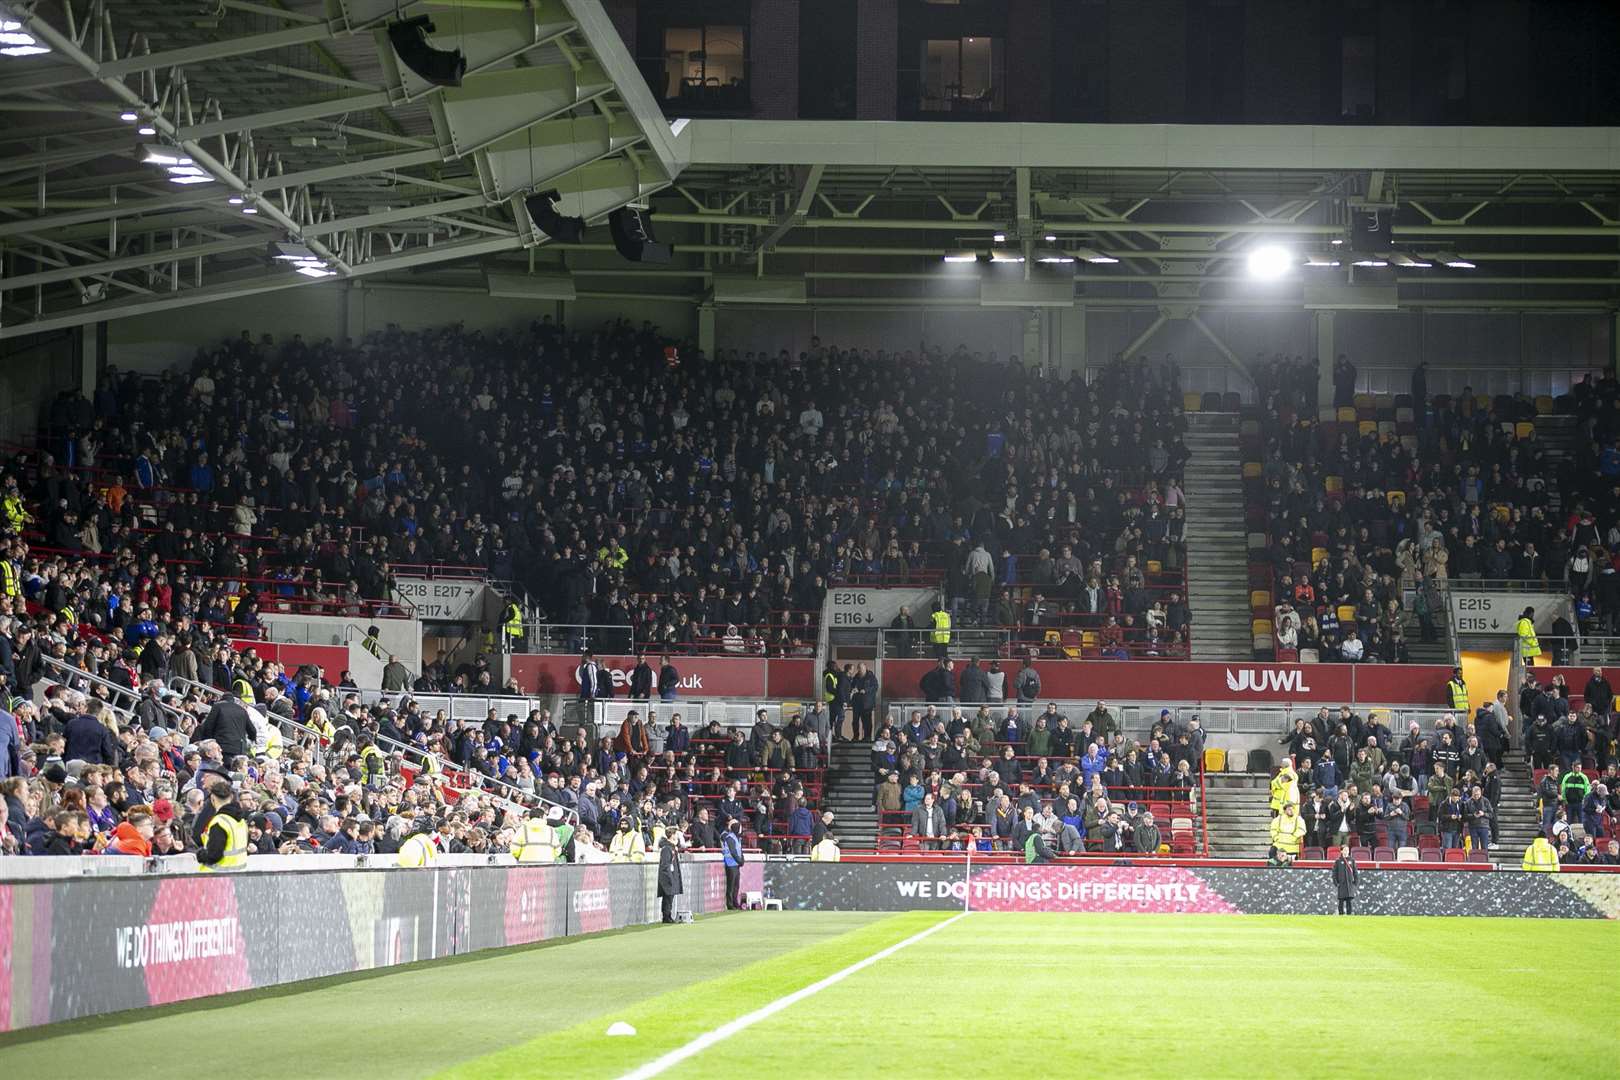 A big away crowd following the Gills on their first visit to Brentford's Gtech Community Stadium. Picture: KPI